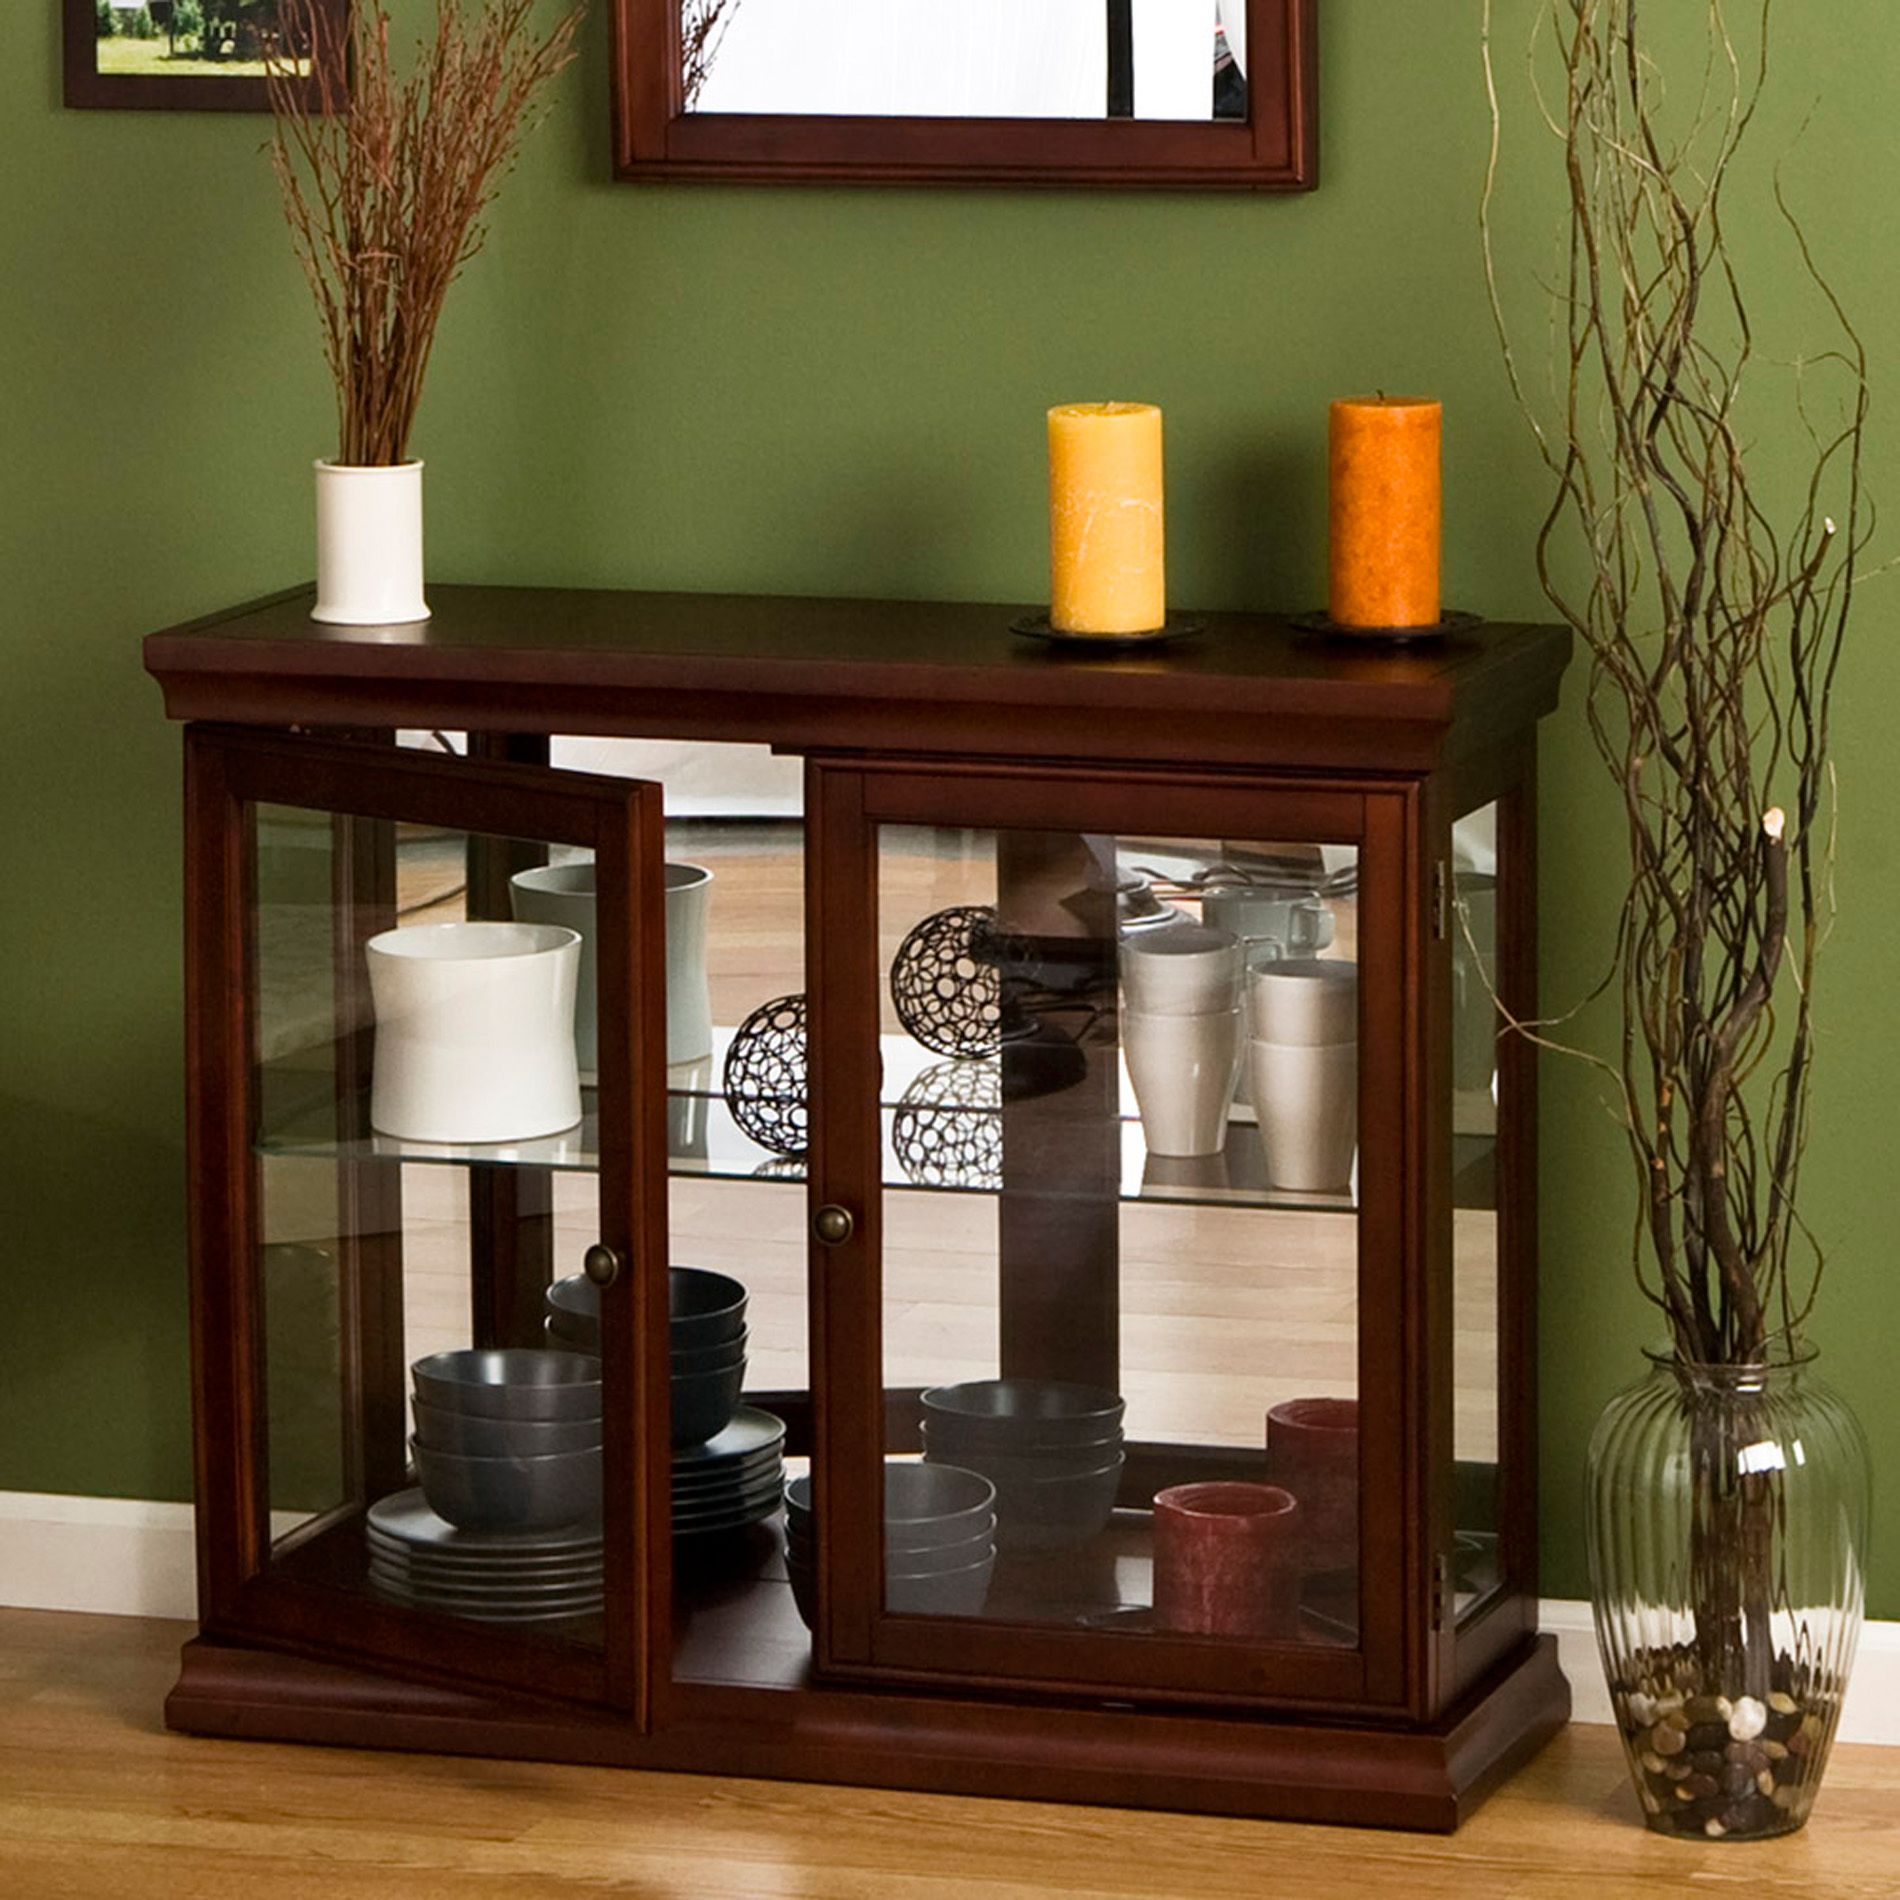 Shop for Brand in Entryway & Hallway Furniture at Kmart.com ...